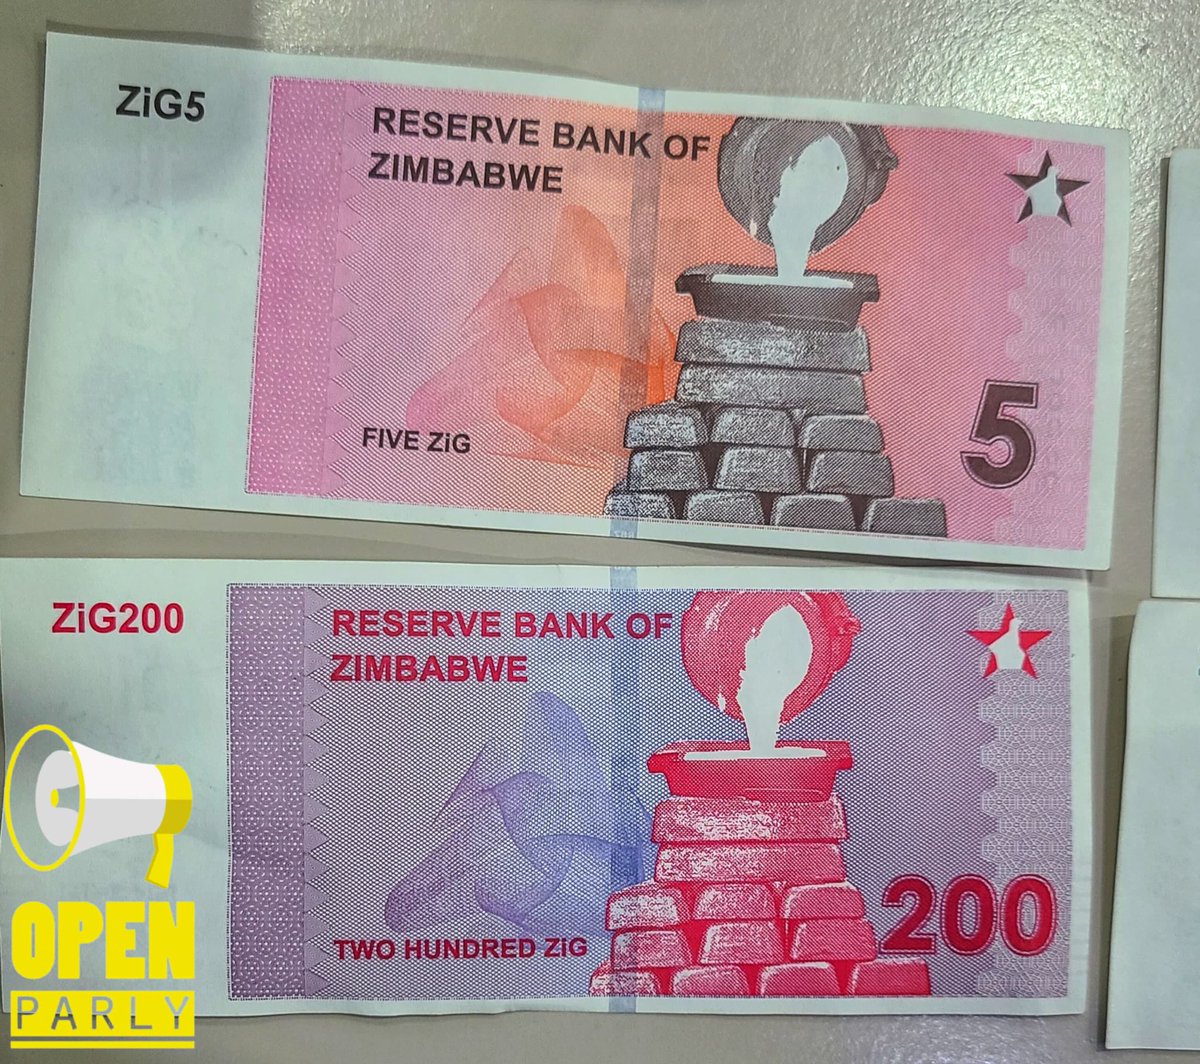 They loot your resources. And then they give you cartoon money. We are led by clowns 🤡🤡🤡 #ZIG #ZimbabweNewCurrency